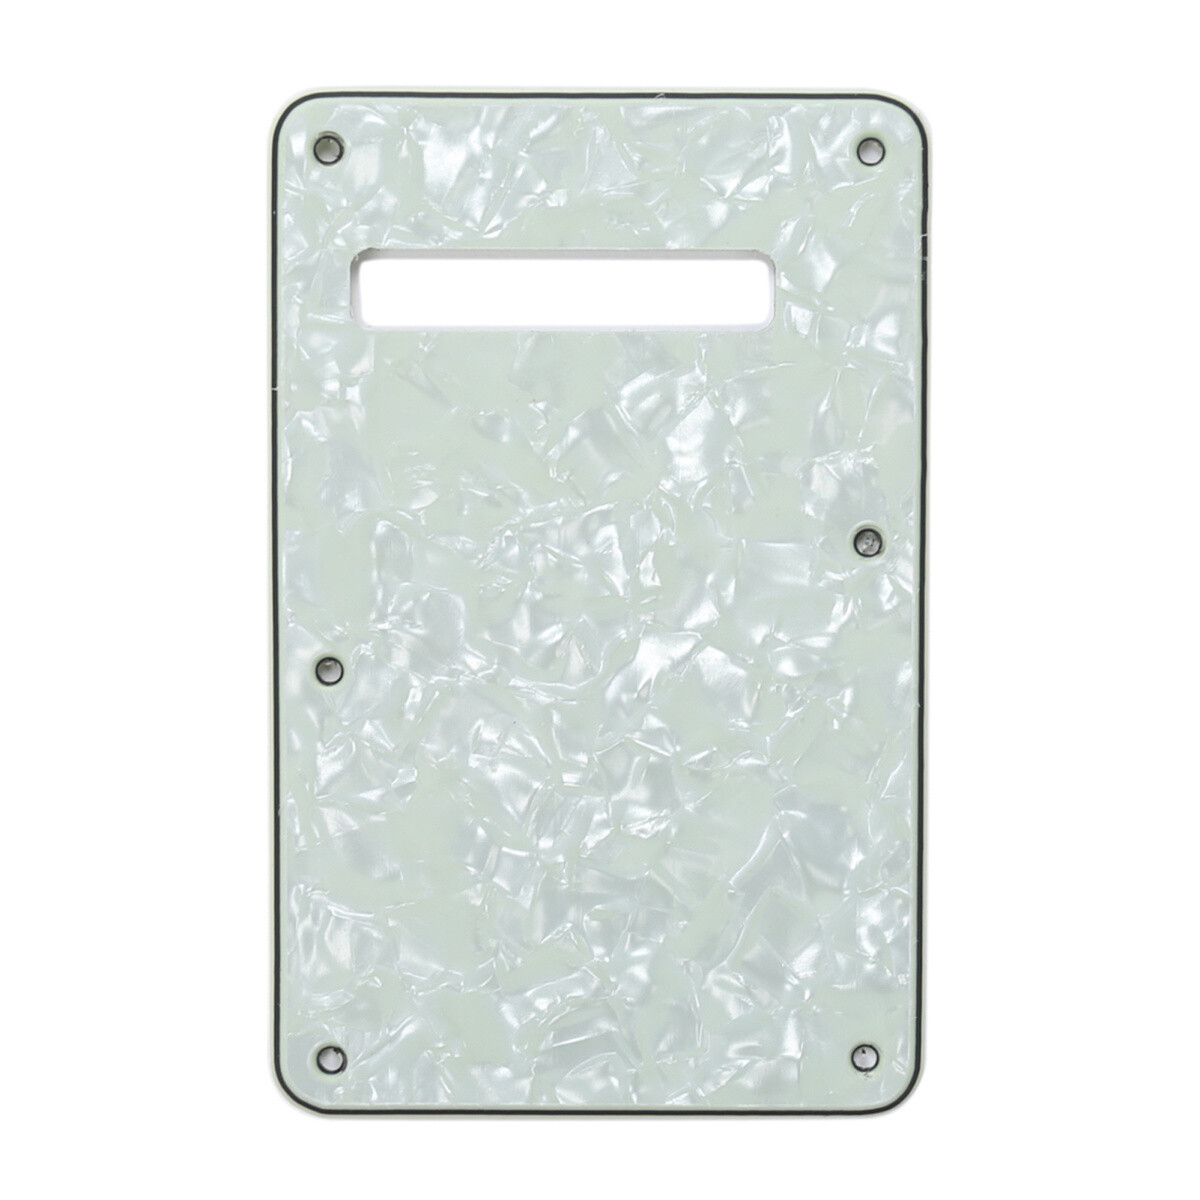 Brio Pearl Mint Modern Style Back Plate Tremolo Cover 4 ply - US/Mexican Fender®Strat® Fit